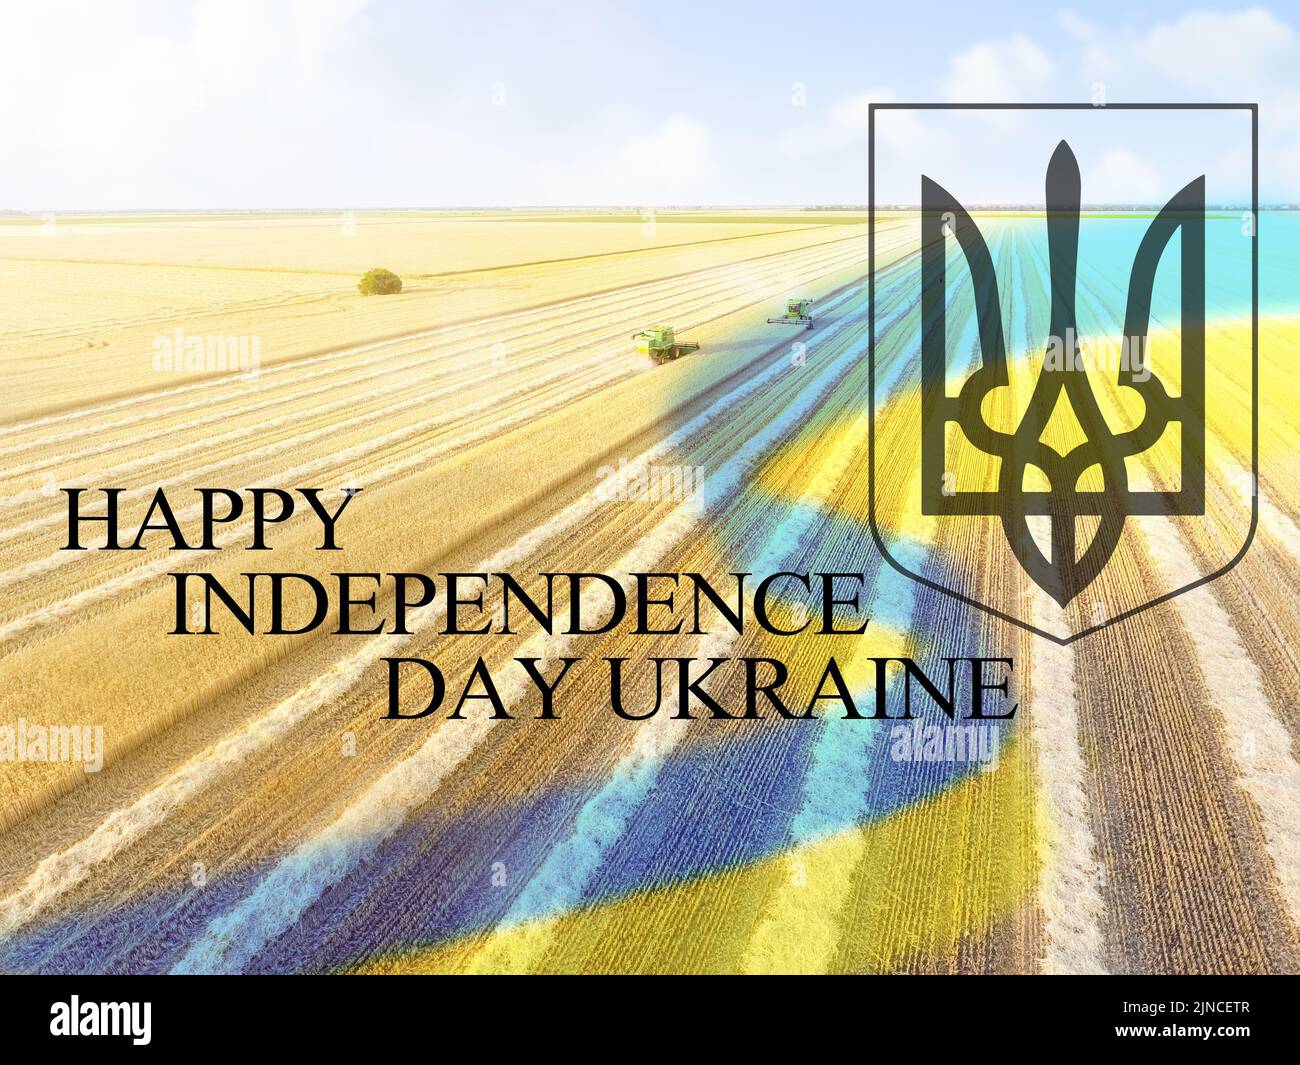 Poster for Ukrainian Independence Day with wheat field Stock Photo